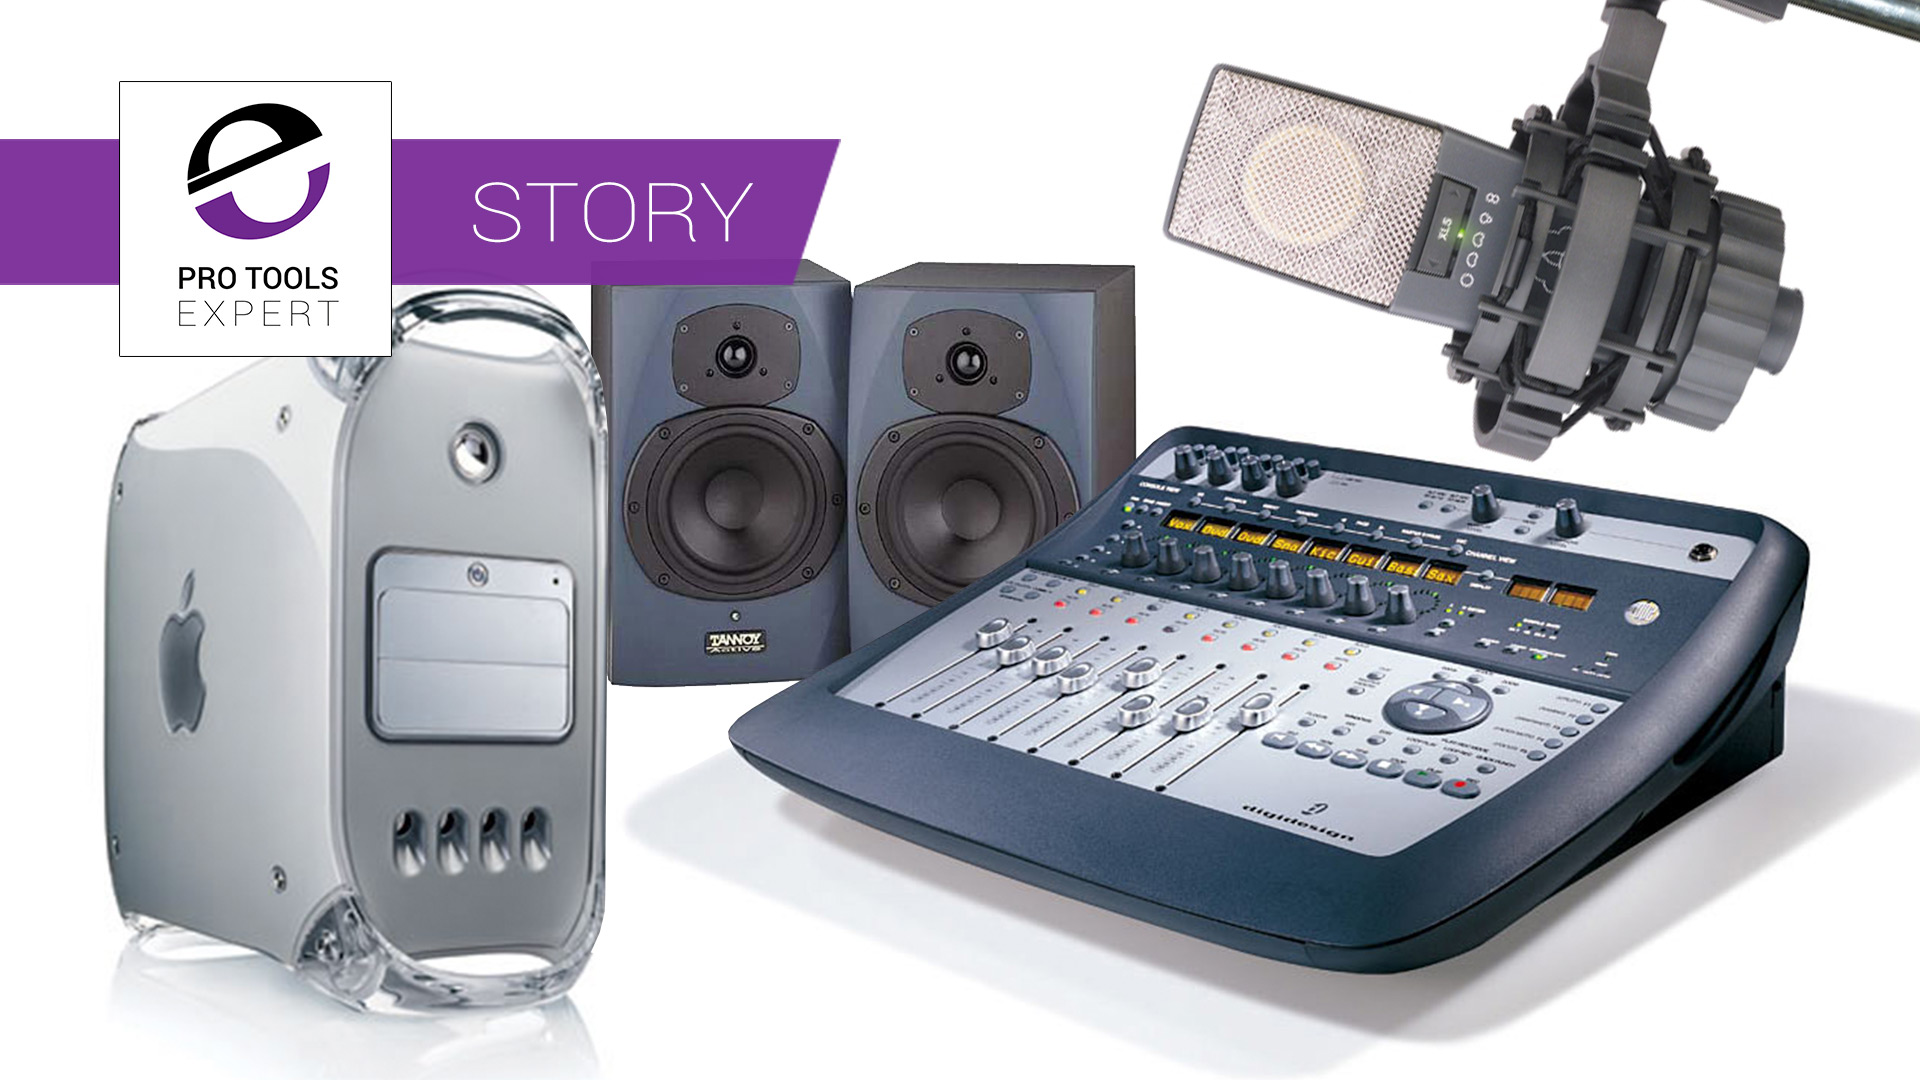 My First Pro Tools Home Recording Studio On A Student Budget | Pro Tools -  The leading website for Pro Tools users